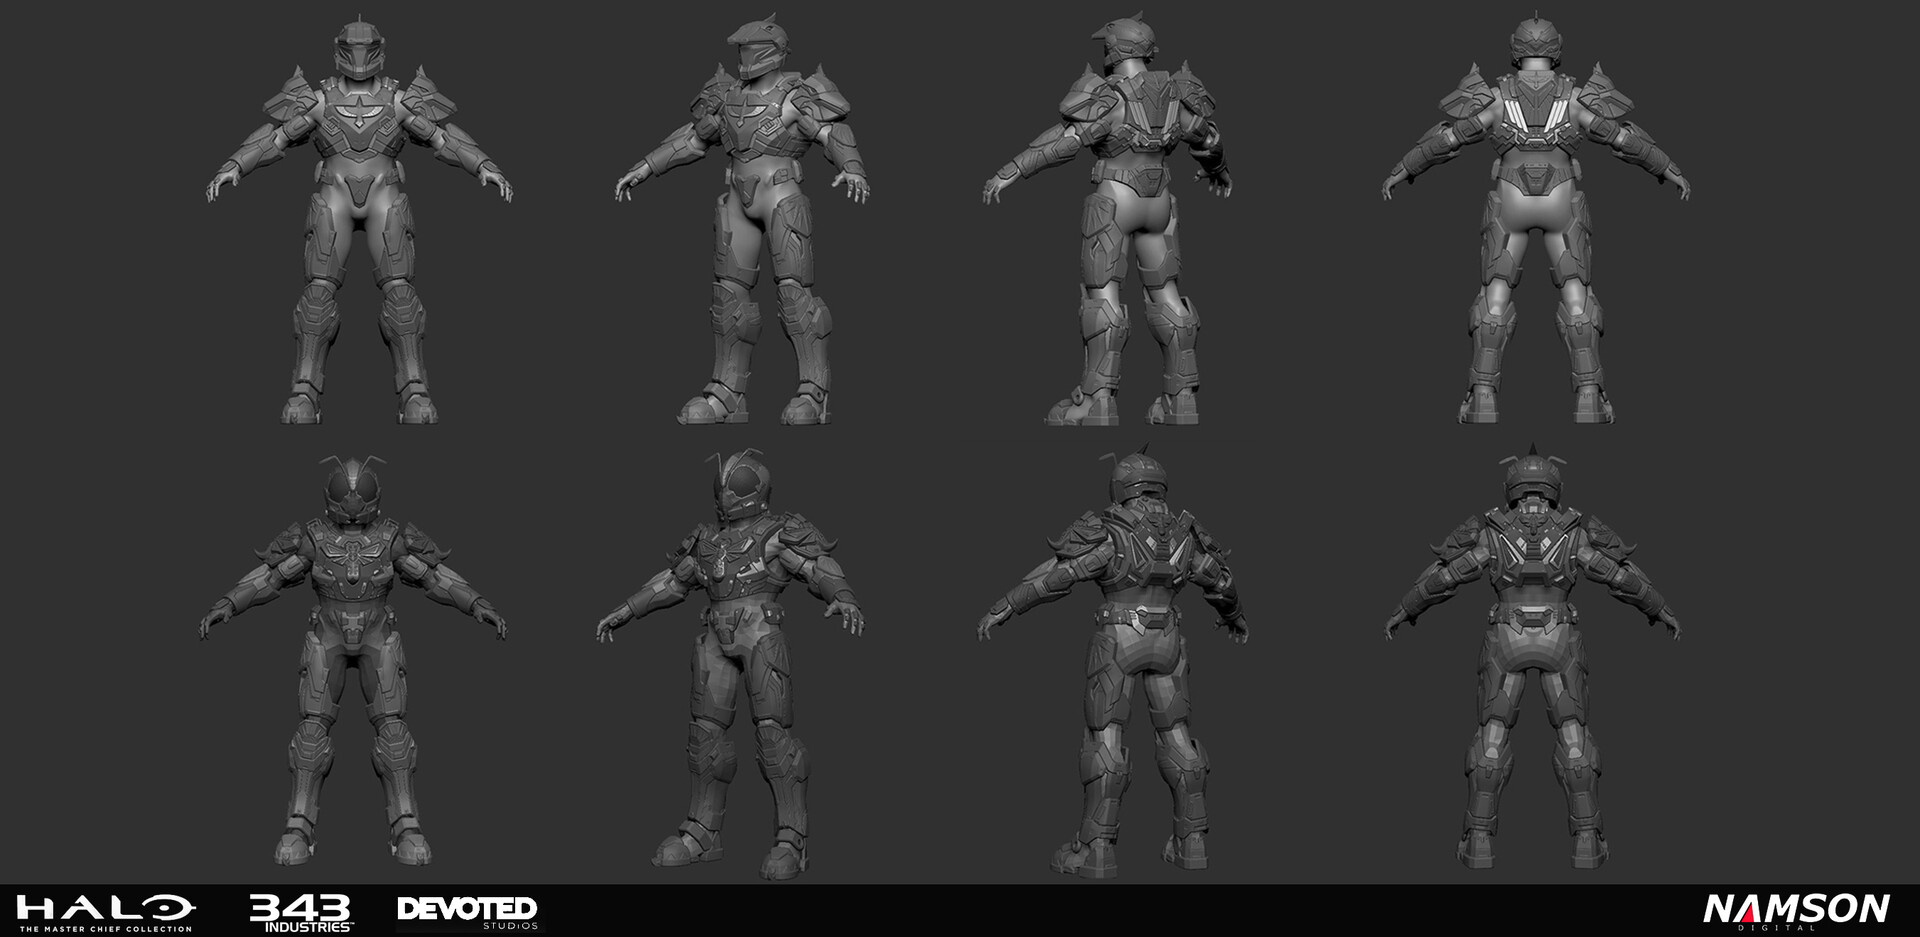 ArtStation - Halo: The Master Chief Collection's Spartan Armors